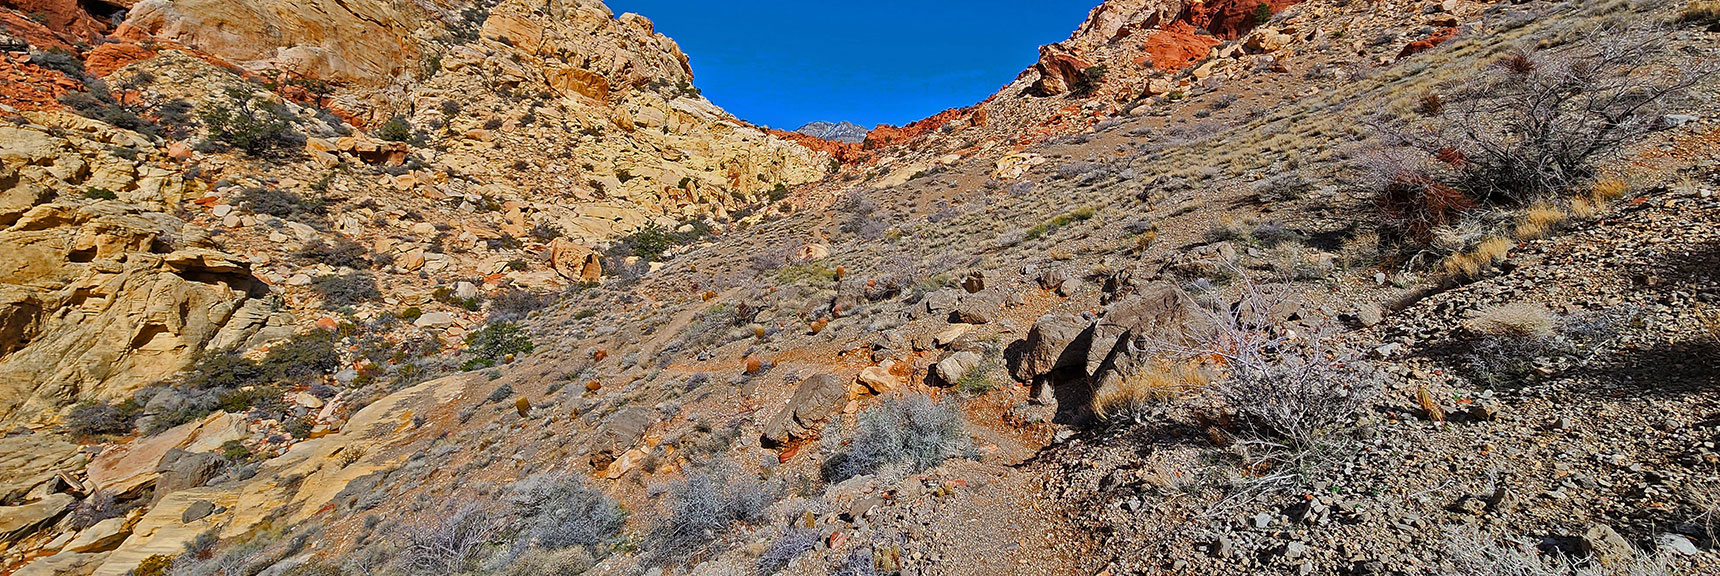 The Ash Canyon Trail Becomes More Distinct Near and Beyond Ash Canyon Summit | Ash Canyon to Calico Tanks | Calico Basin and Red Rock Canyon, Nevada | David Smith | Las Vegas Area Trails